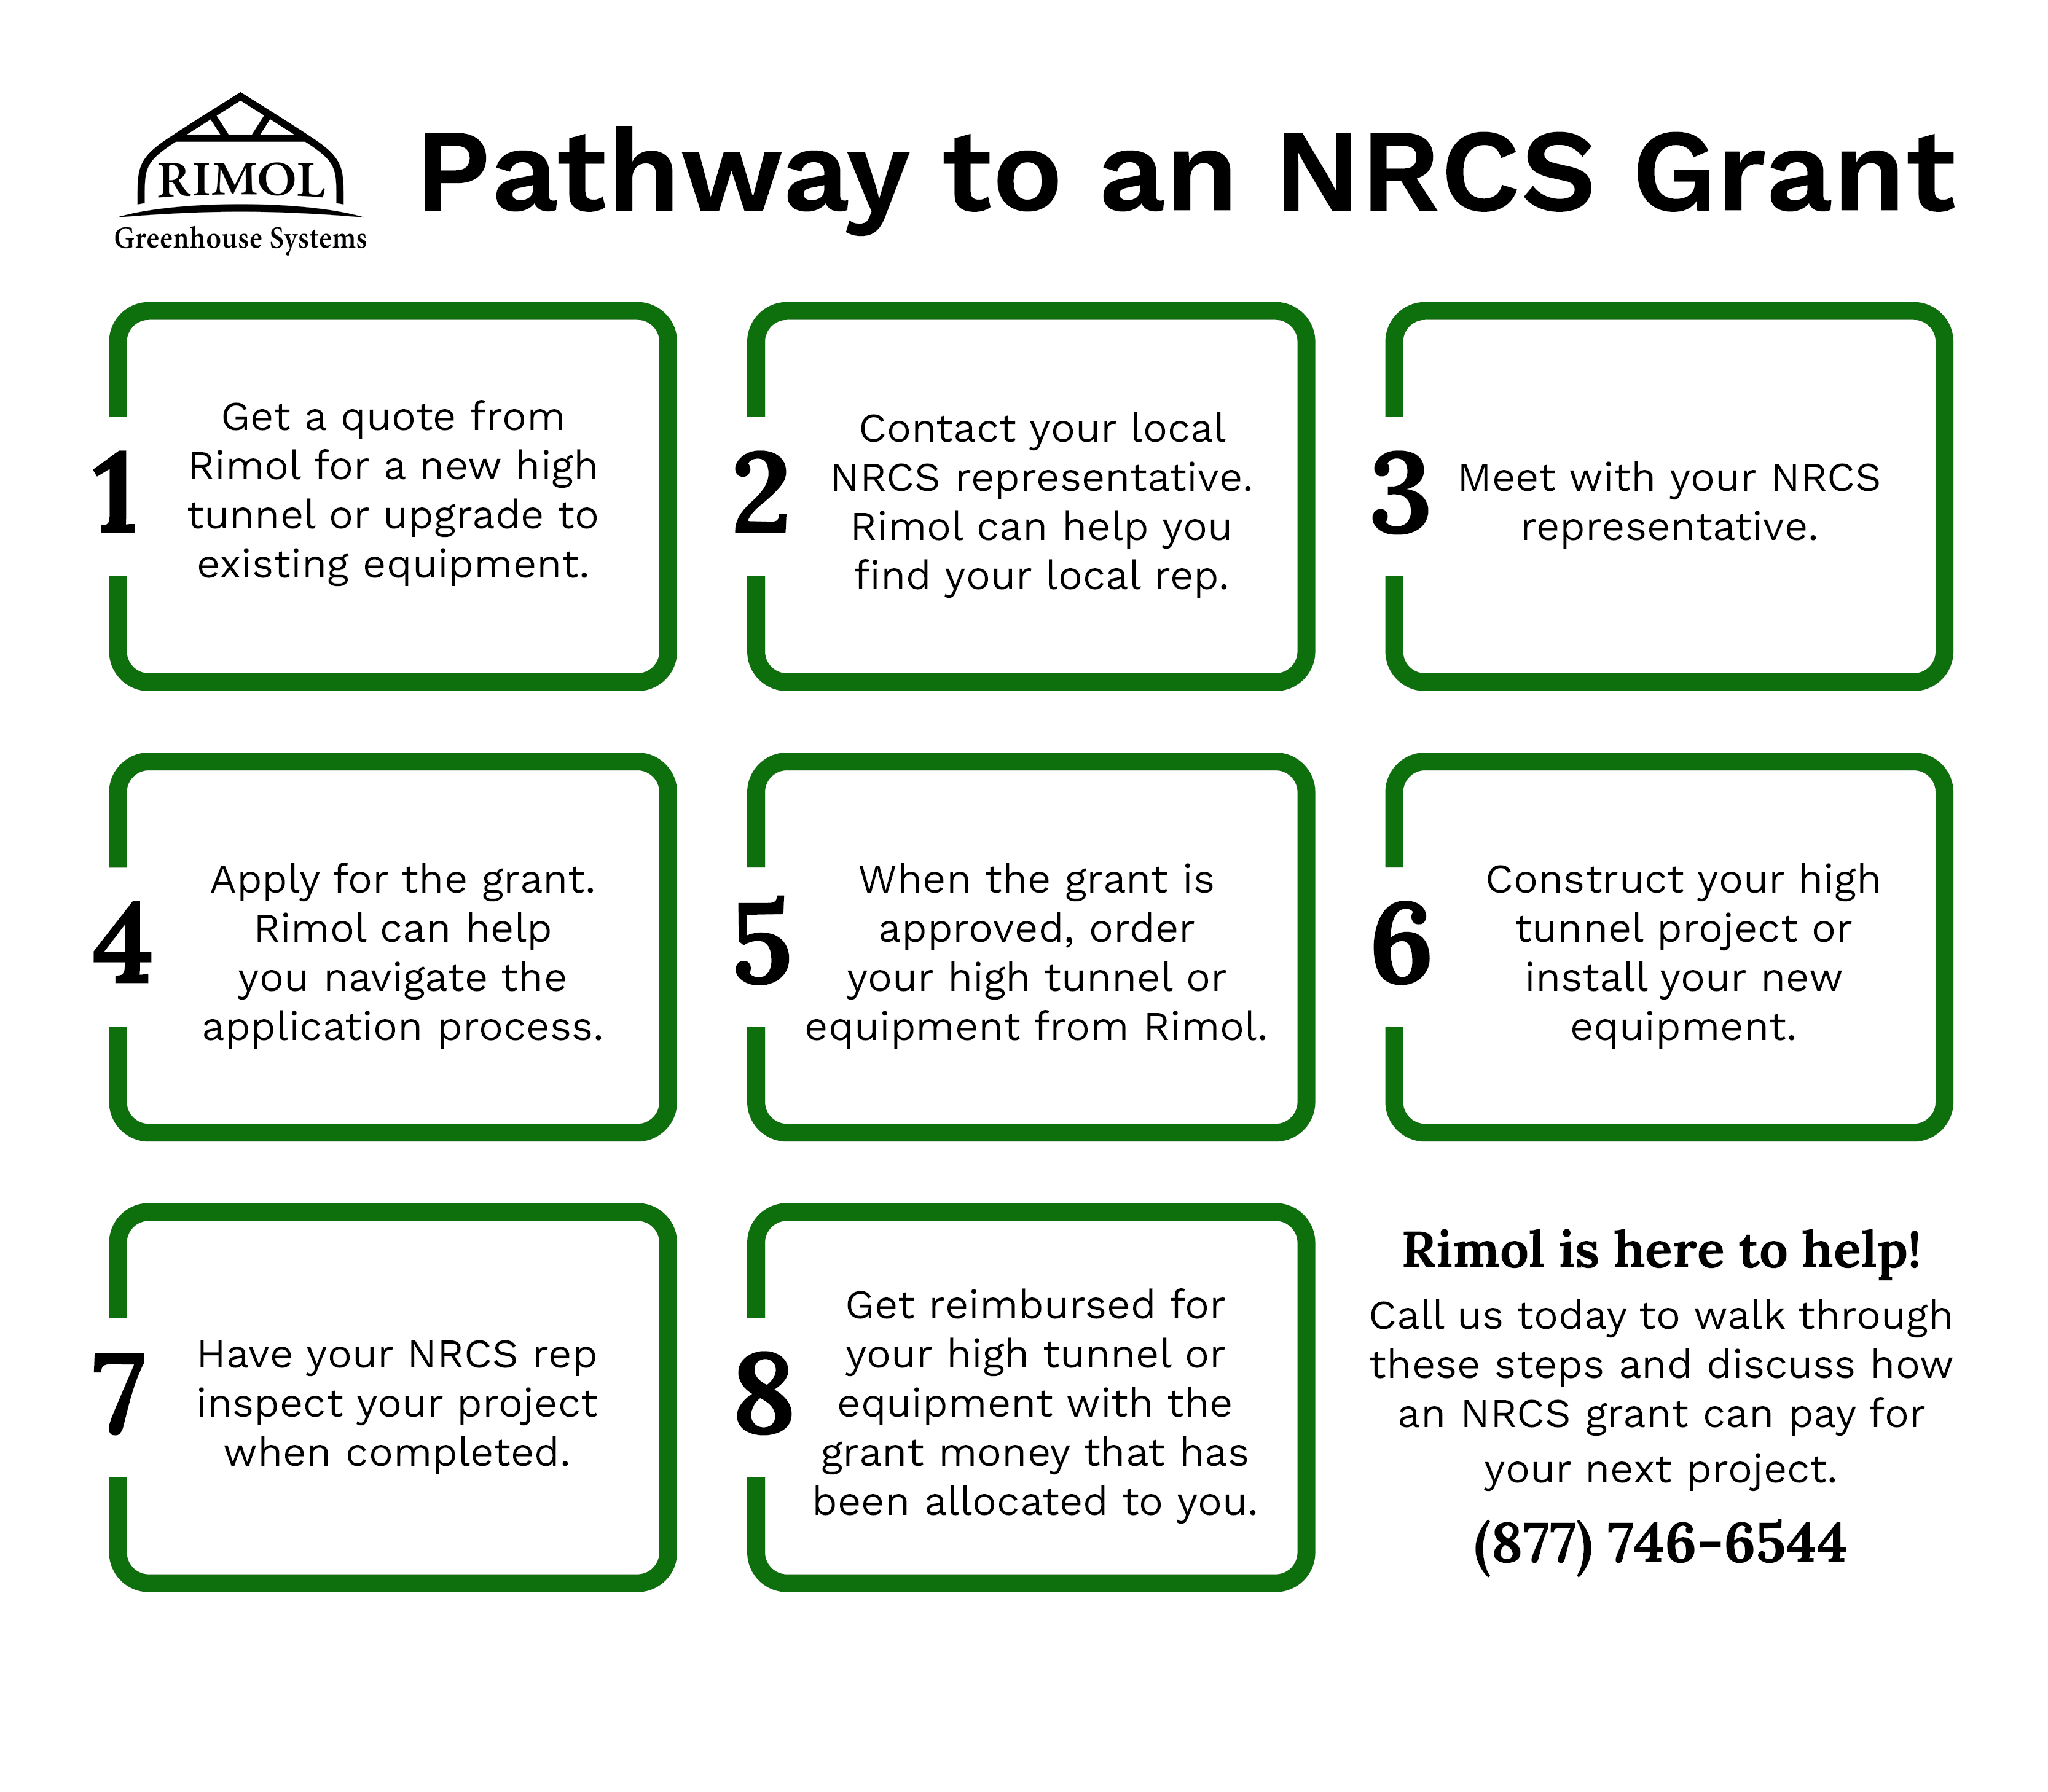 Pathway to an NRCS Grant - Rimol Greenhouse Systems